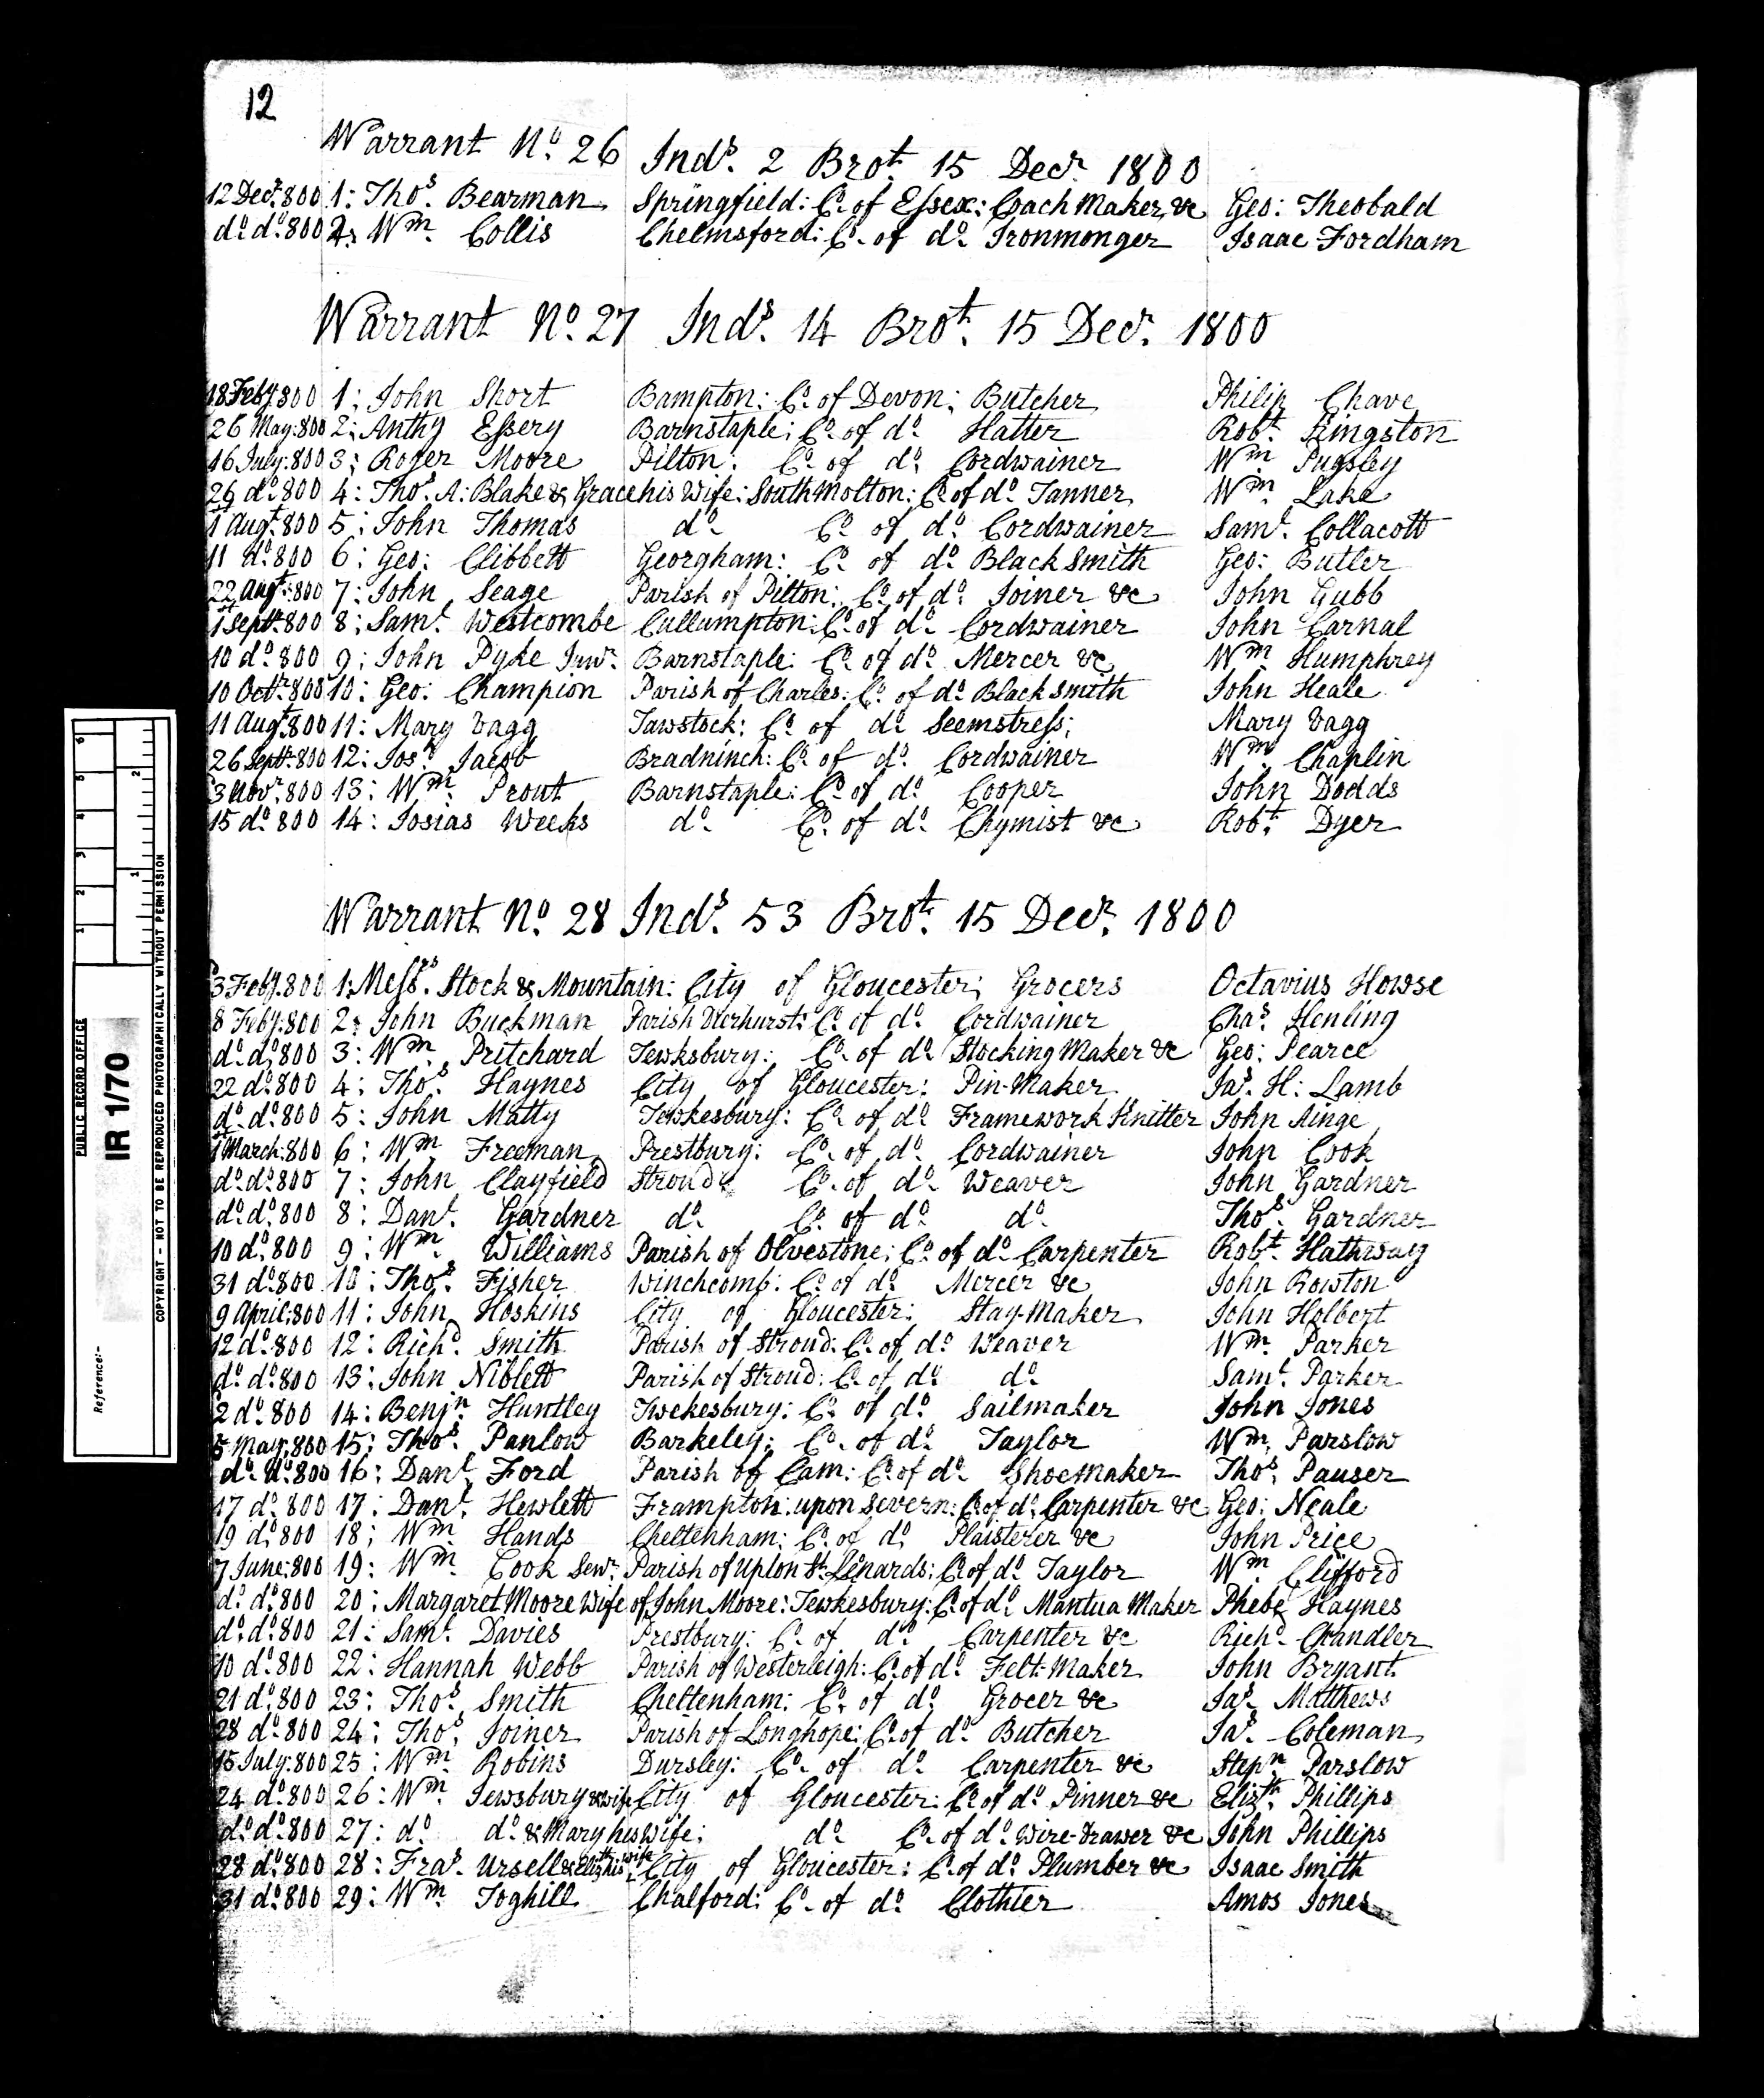 Record of duties paid for apprentices, Thos Bearman of Springfield 1800